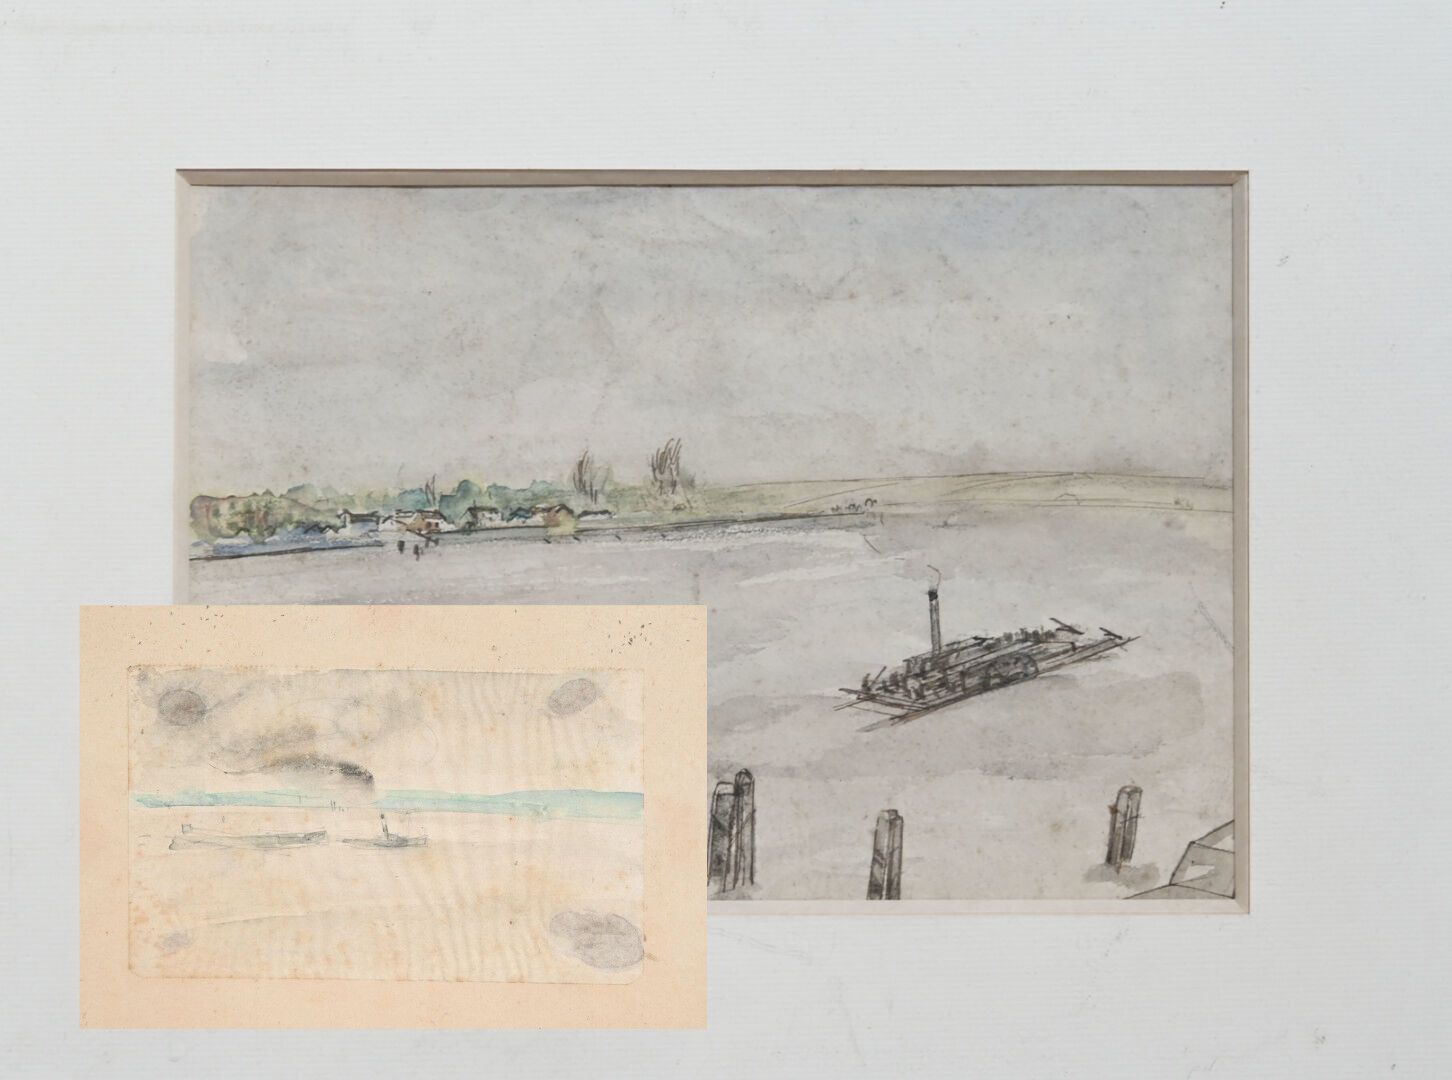 Null Charles Félix GIR (1883- 1941) Two drawings.

"Steam barge on the river" Pa&hellip;